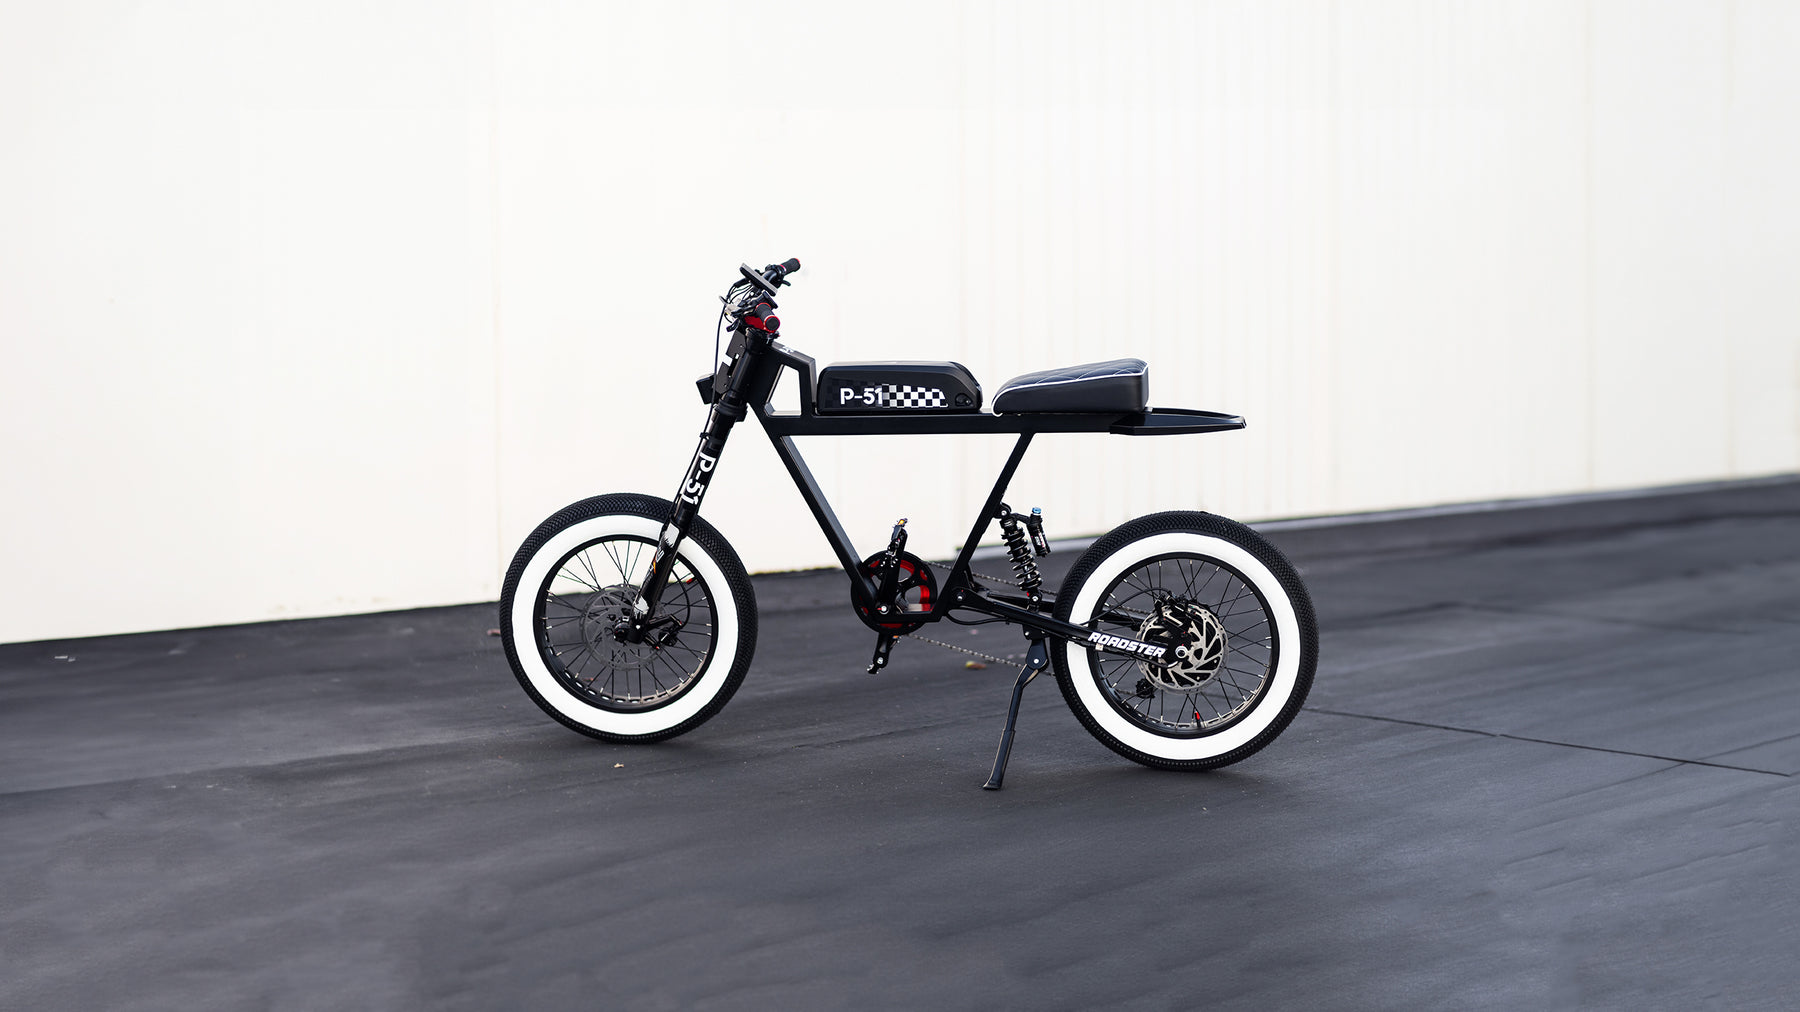 P-51 Roadster electric bike, class 2 ebike with white wall tires and rear fender